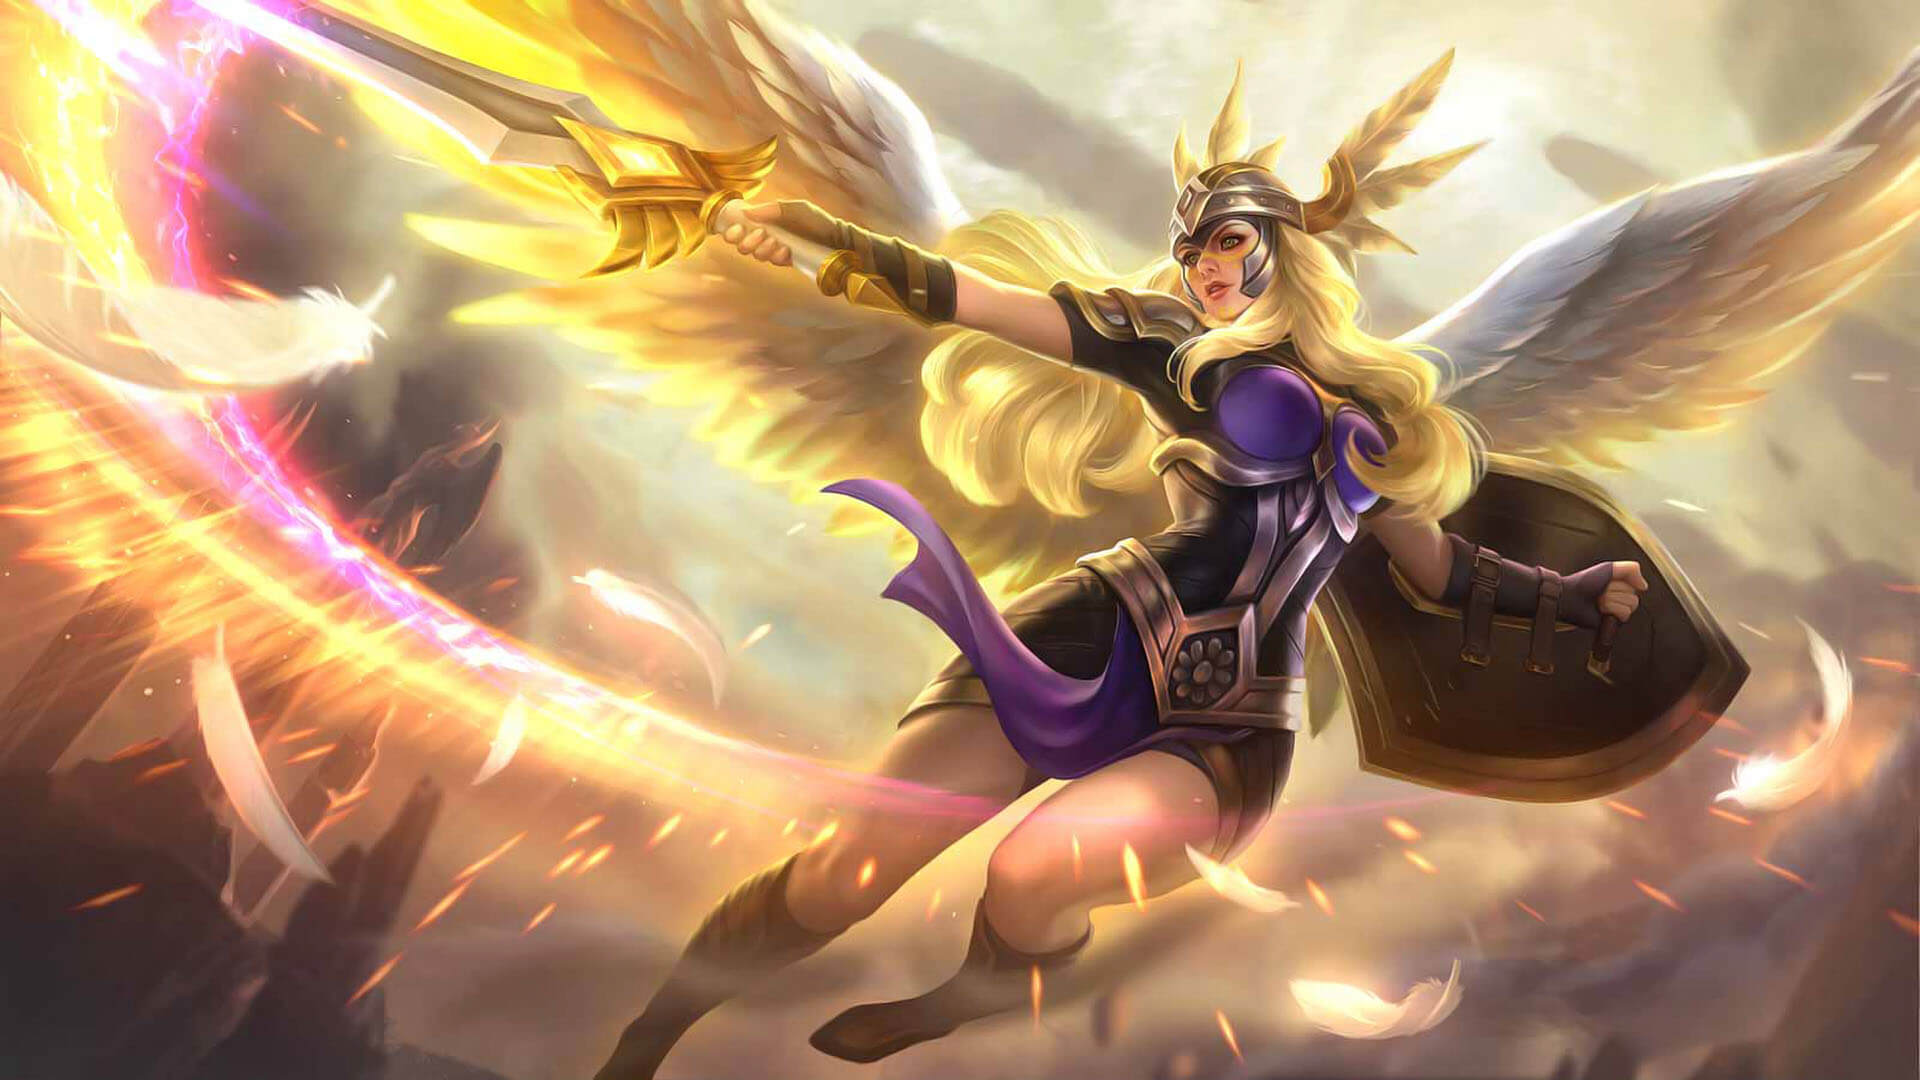 Mobile Legends Tips No Lag: 8 Ways to Become the Best Local Mobile Legends Mobile